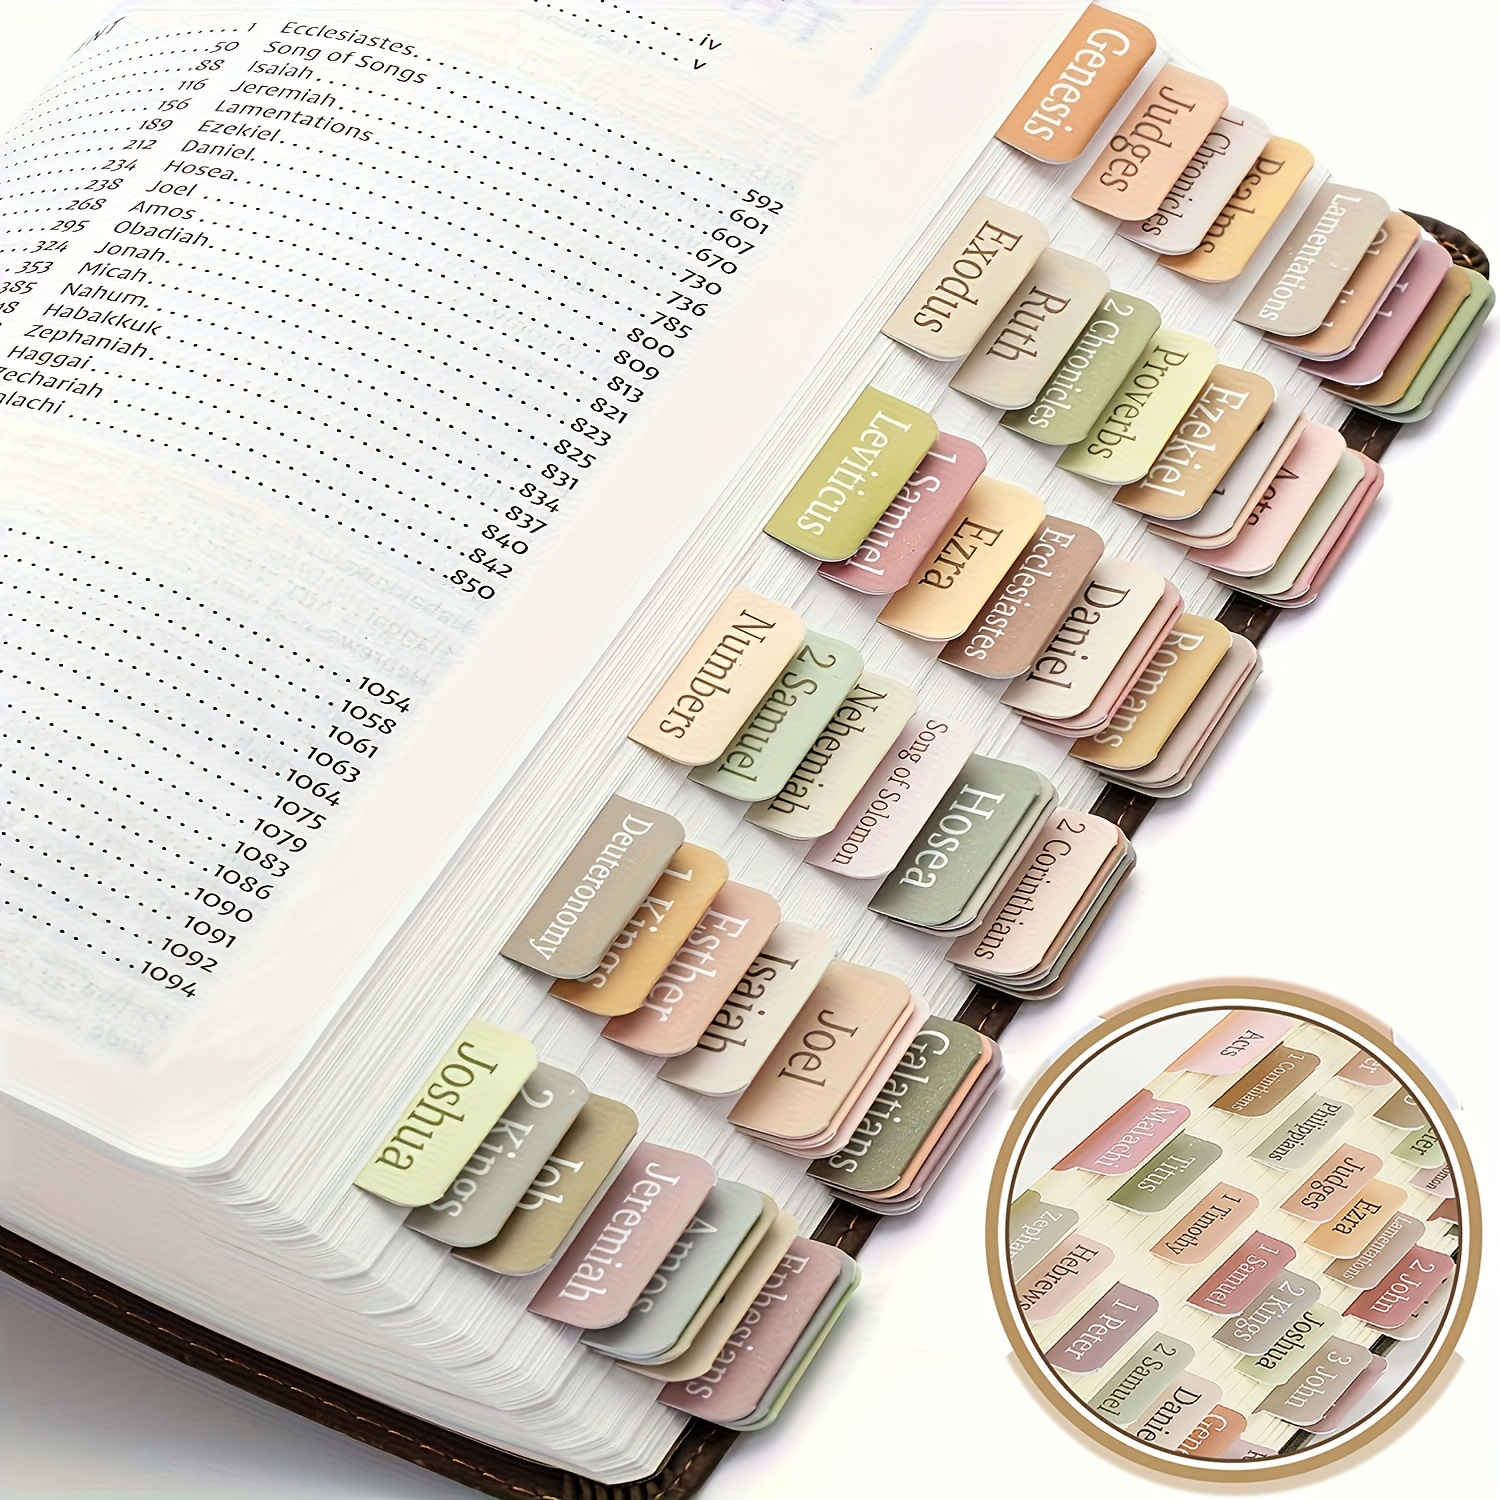 bible tabs sticky index tabs 75 tabs boho theme laminated bible tabs for women and men study bible bible index tabs bible book tabs bible labels tabs bible tabs sticky tabs 5sheets set details 1